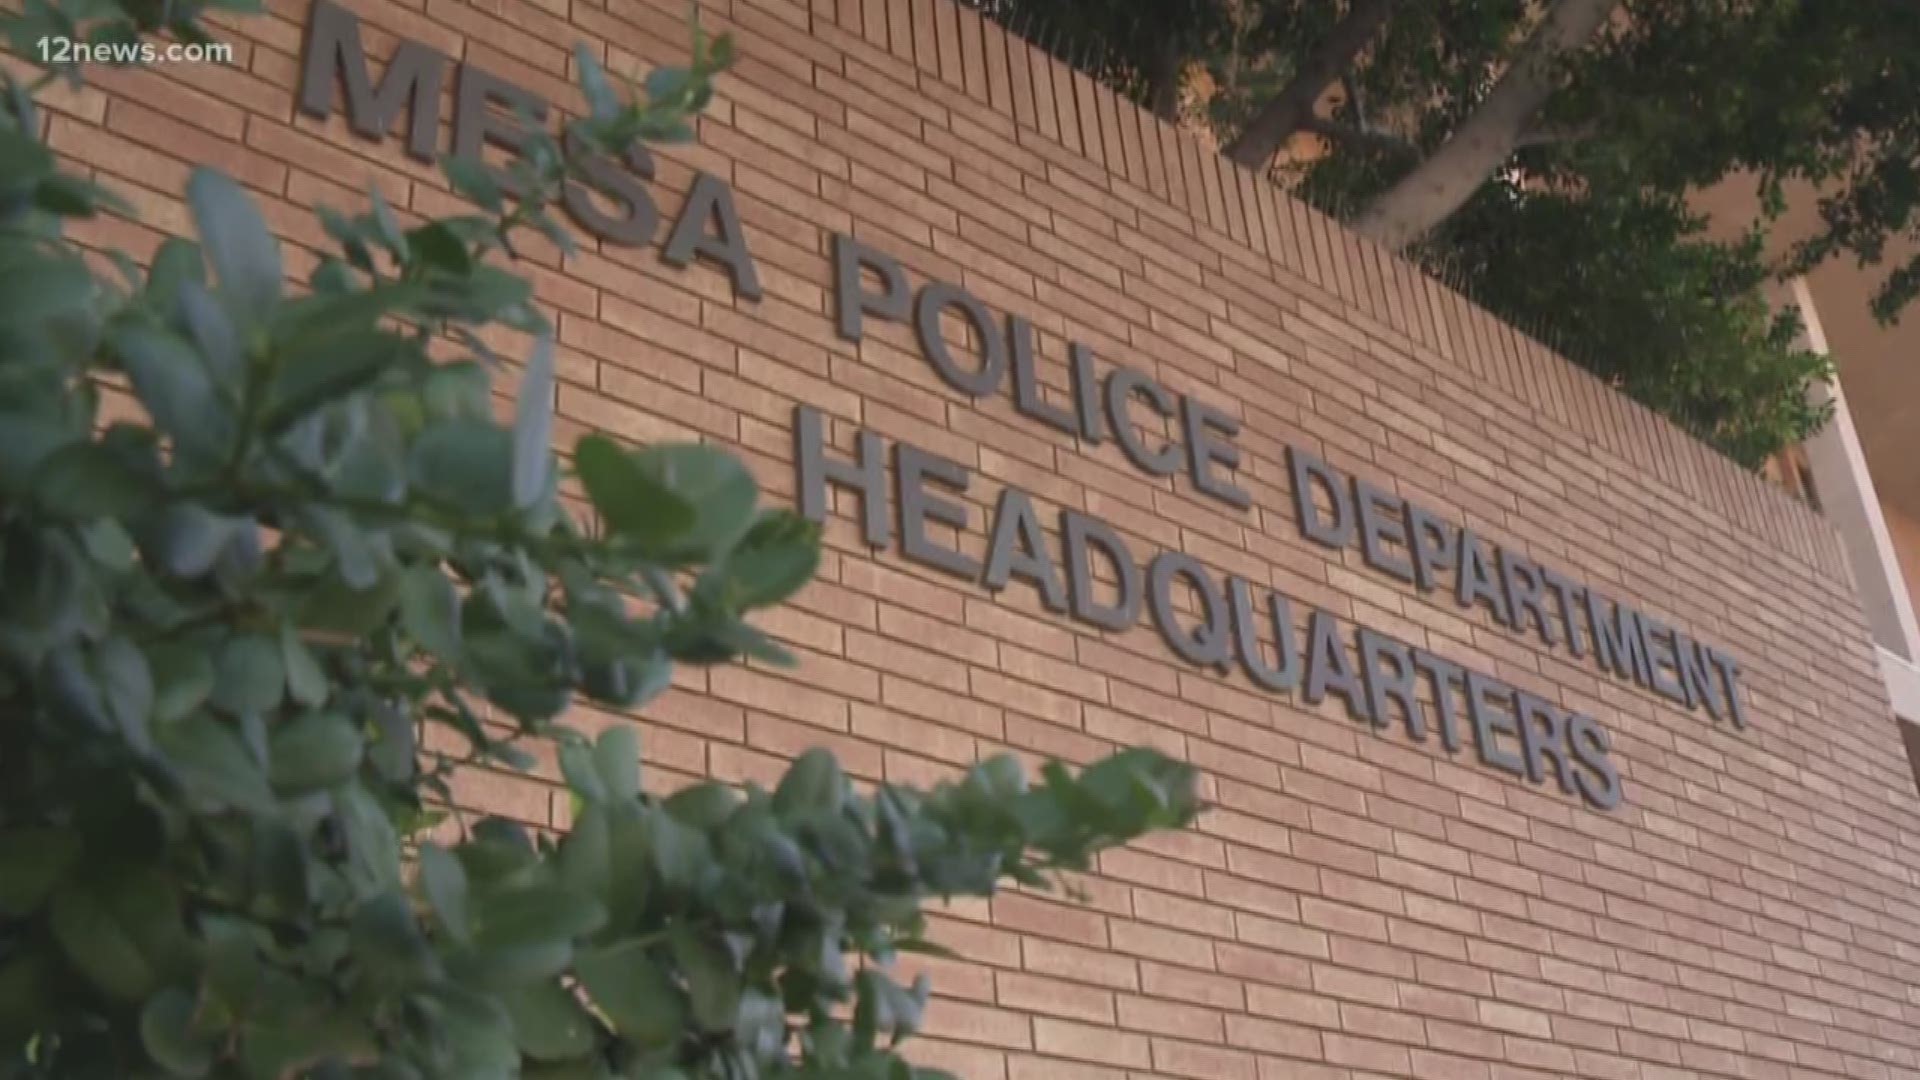 Two Mesa police groups are calling on Police Chief Ramon Batista to resign. Union leaders say the chief's time in office has amounted to a "reign of terror."